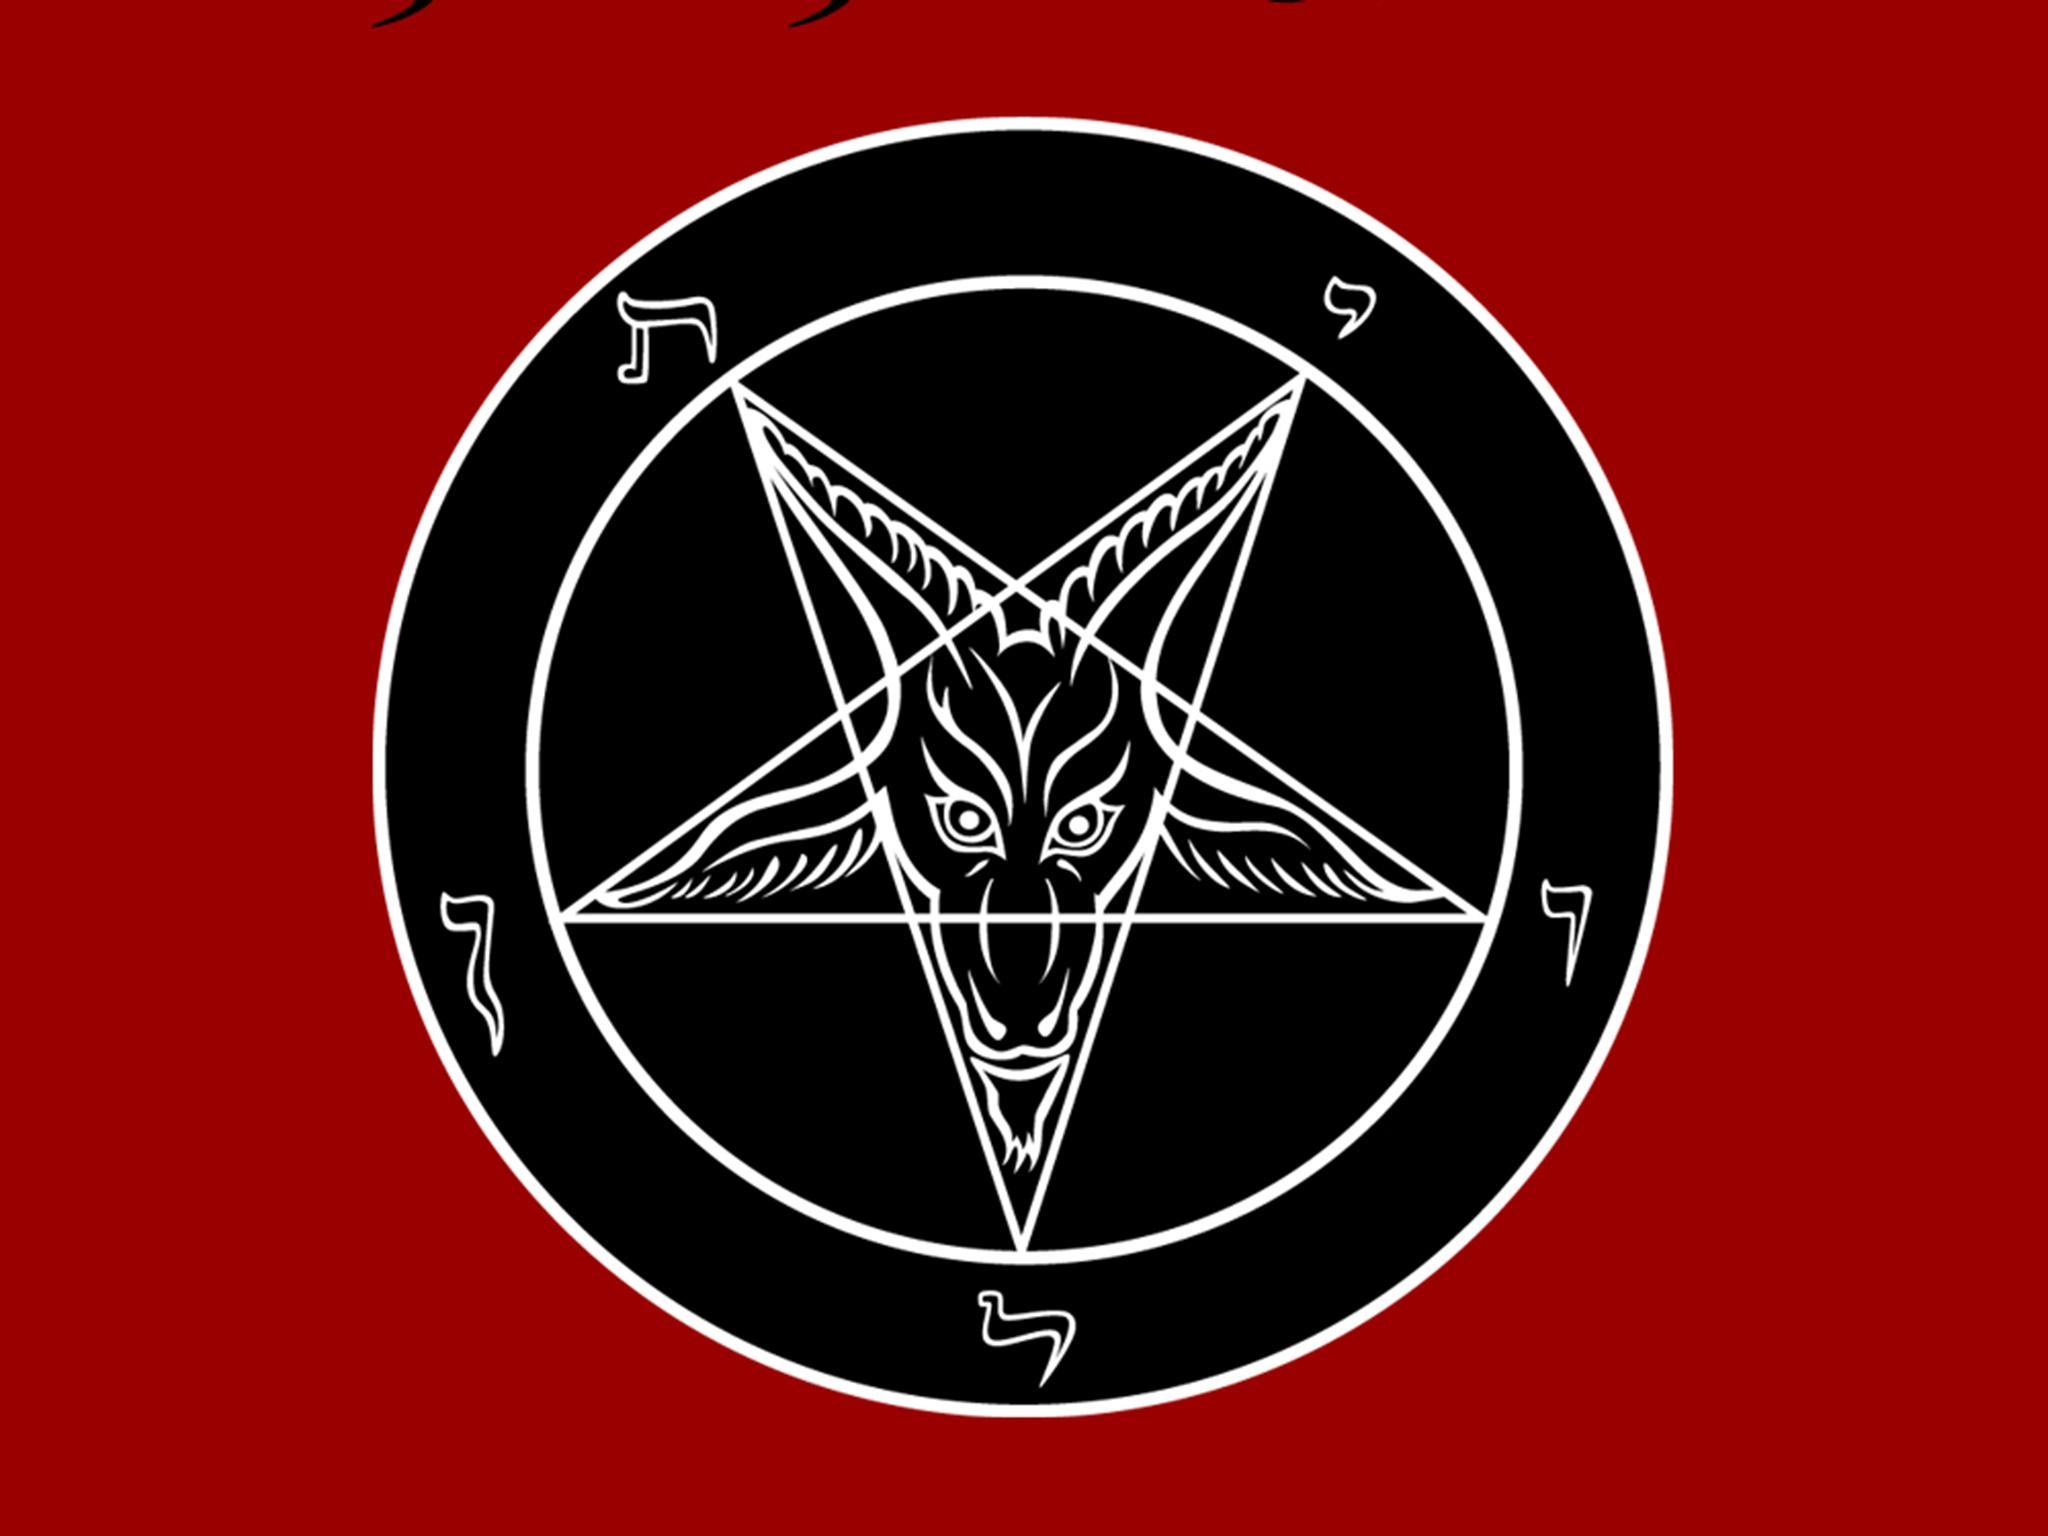 The logo of the Church of Satan, which was founded in 1966